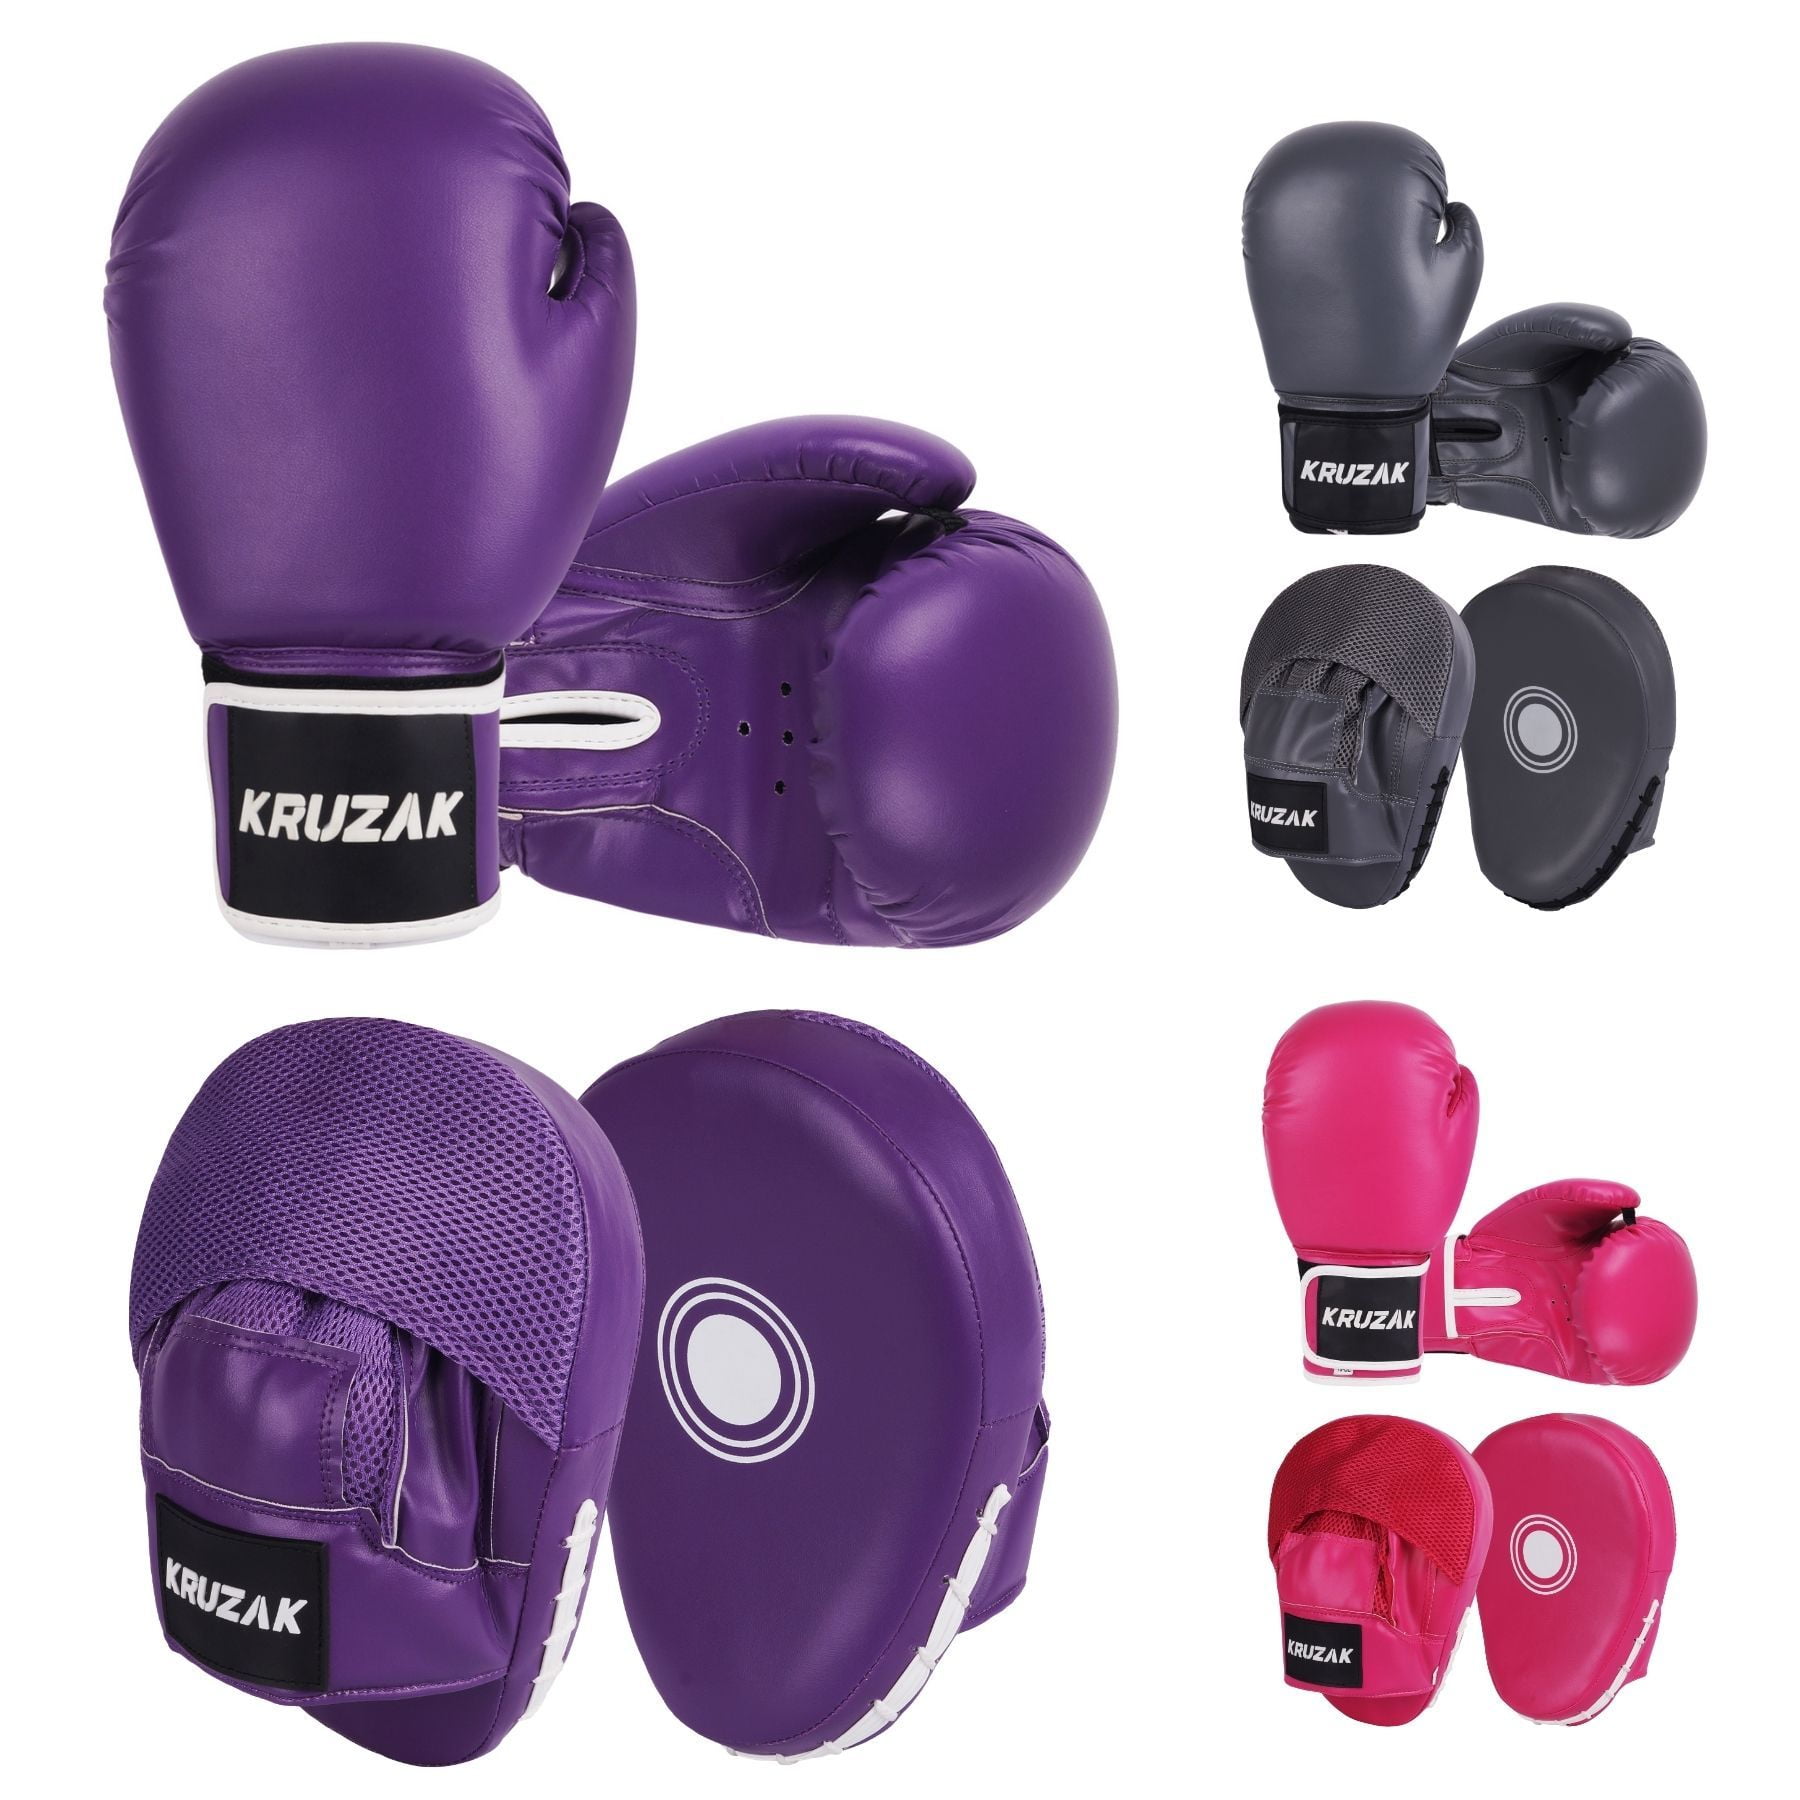 UFC MMA Mixed Martial Arts Fight Gloves Purple Color. 